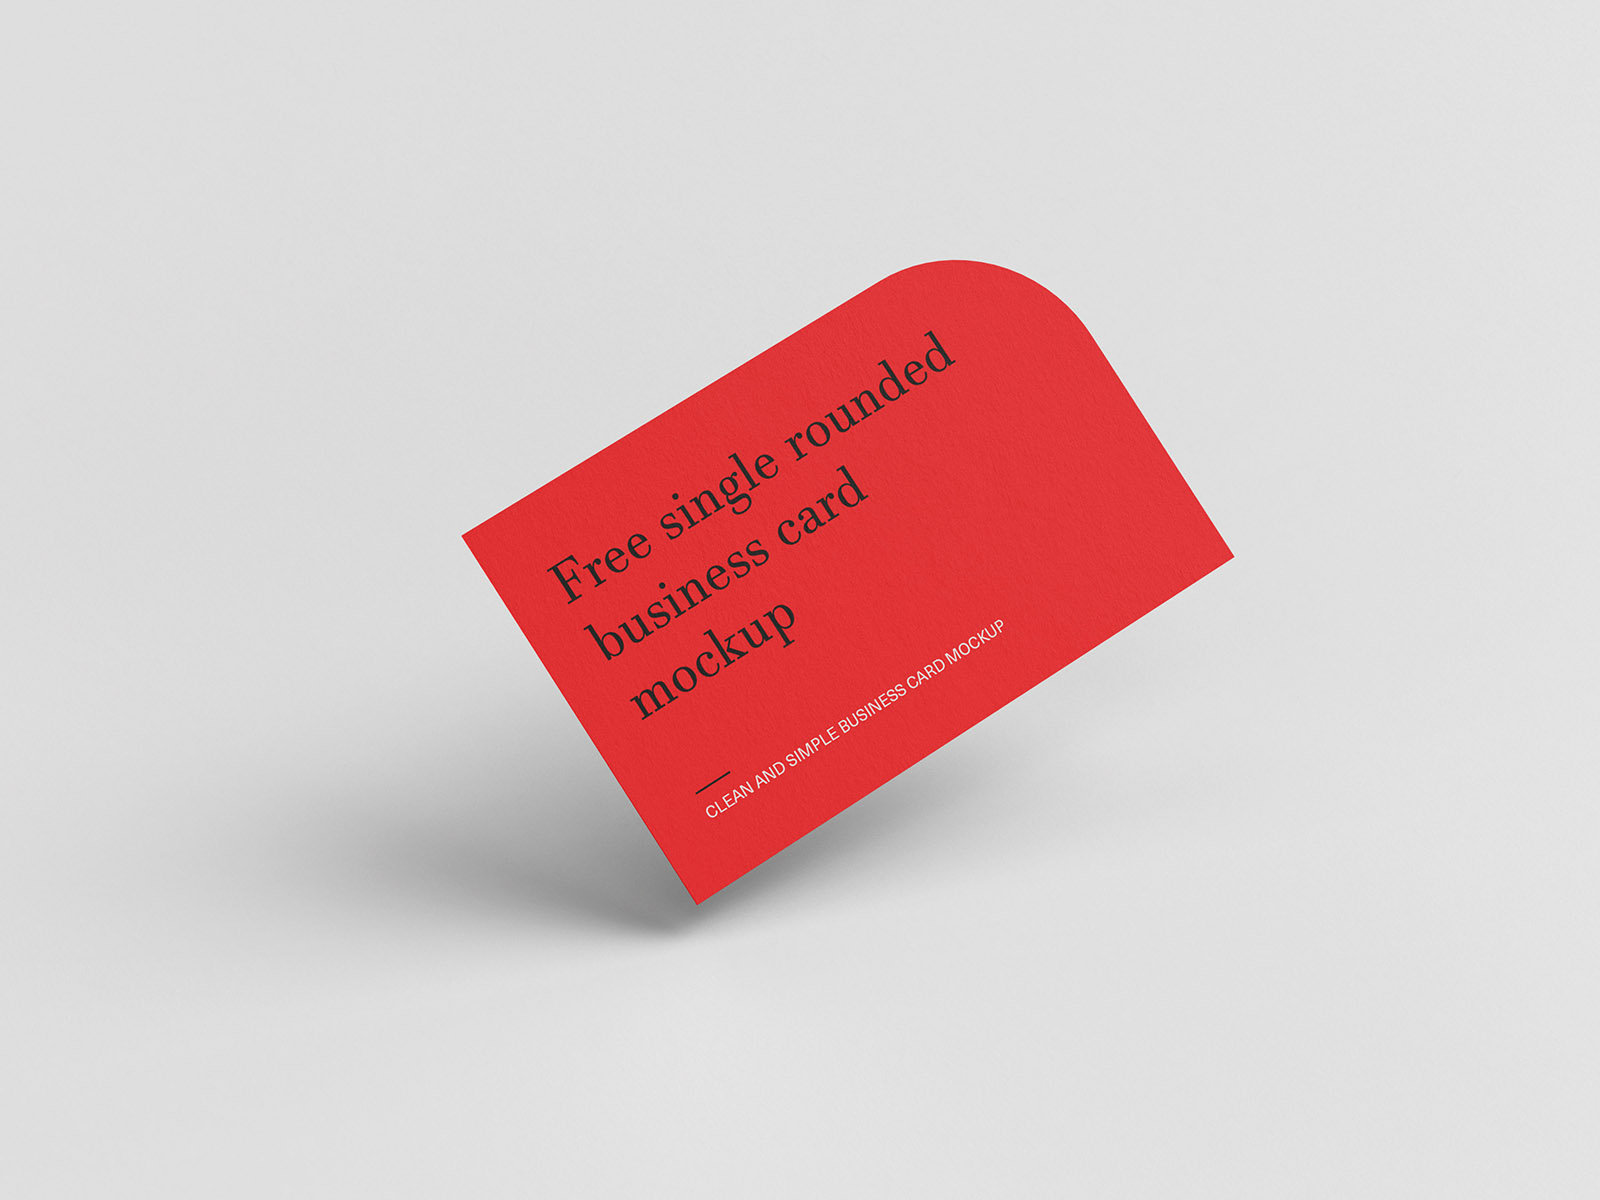 5 Rounded Business Card Mockups in Various Sights FREE PSD